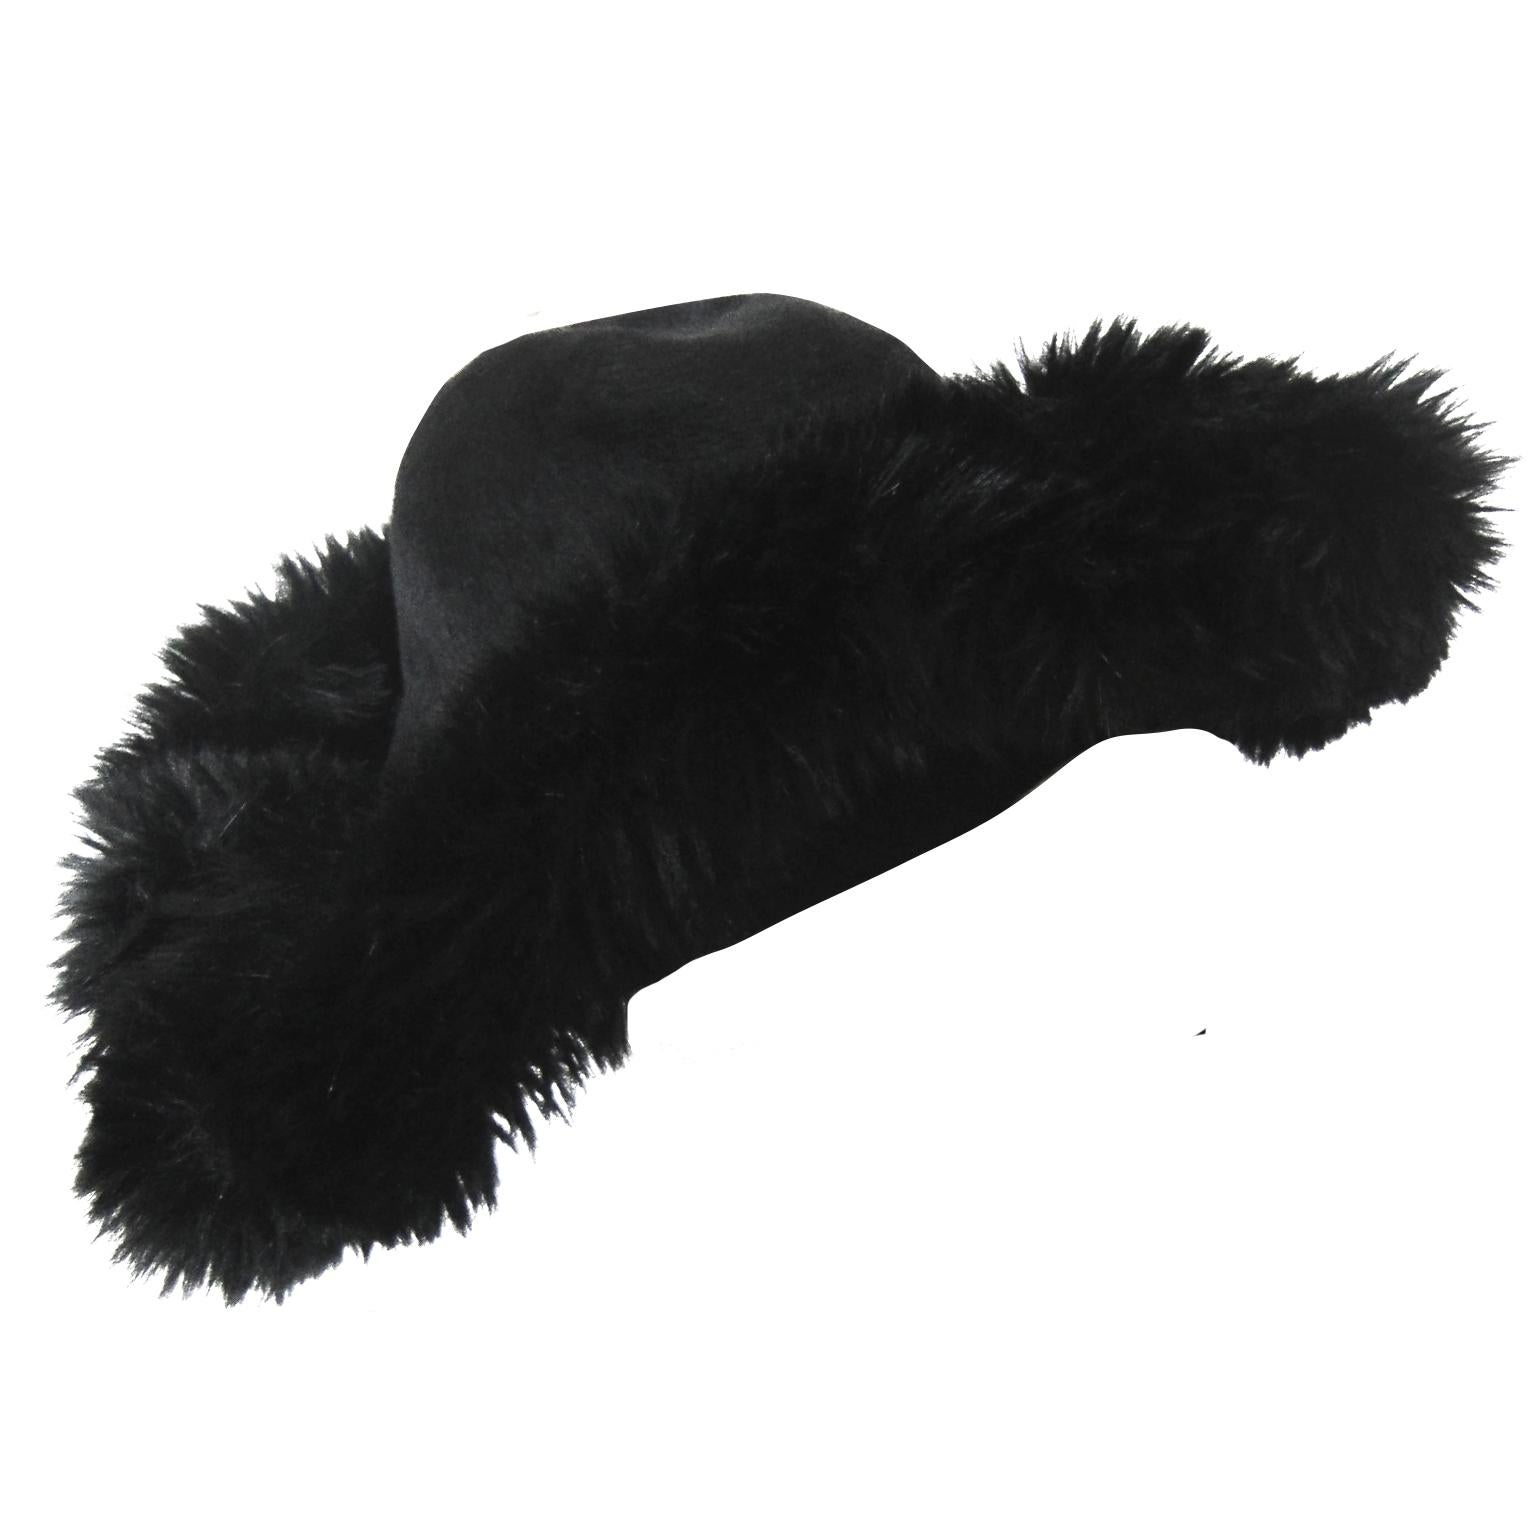 Rare Yohji Yamamoto black hat from circa AW 2013.
The hat is in black felt/wool with a round top, asymmetric wide faux fur brim with one side tuck detail. Truly amazing piece.